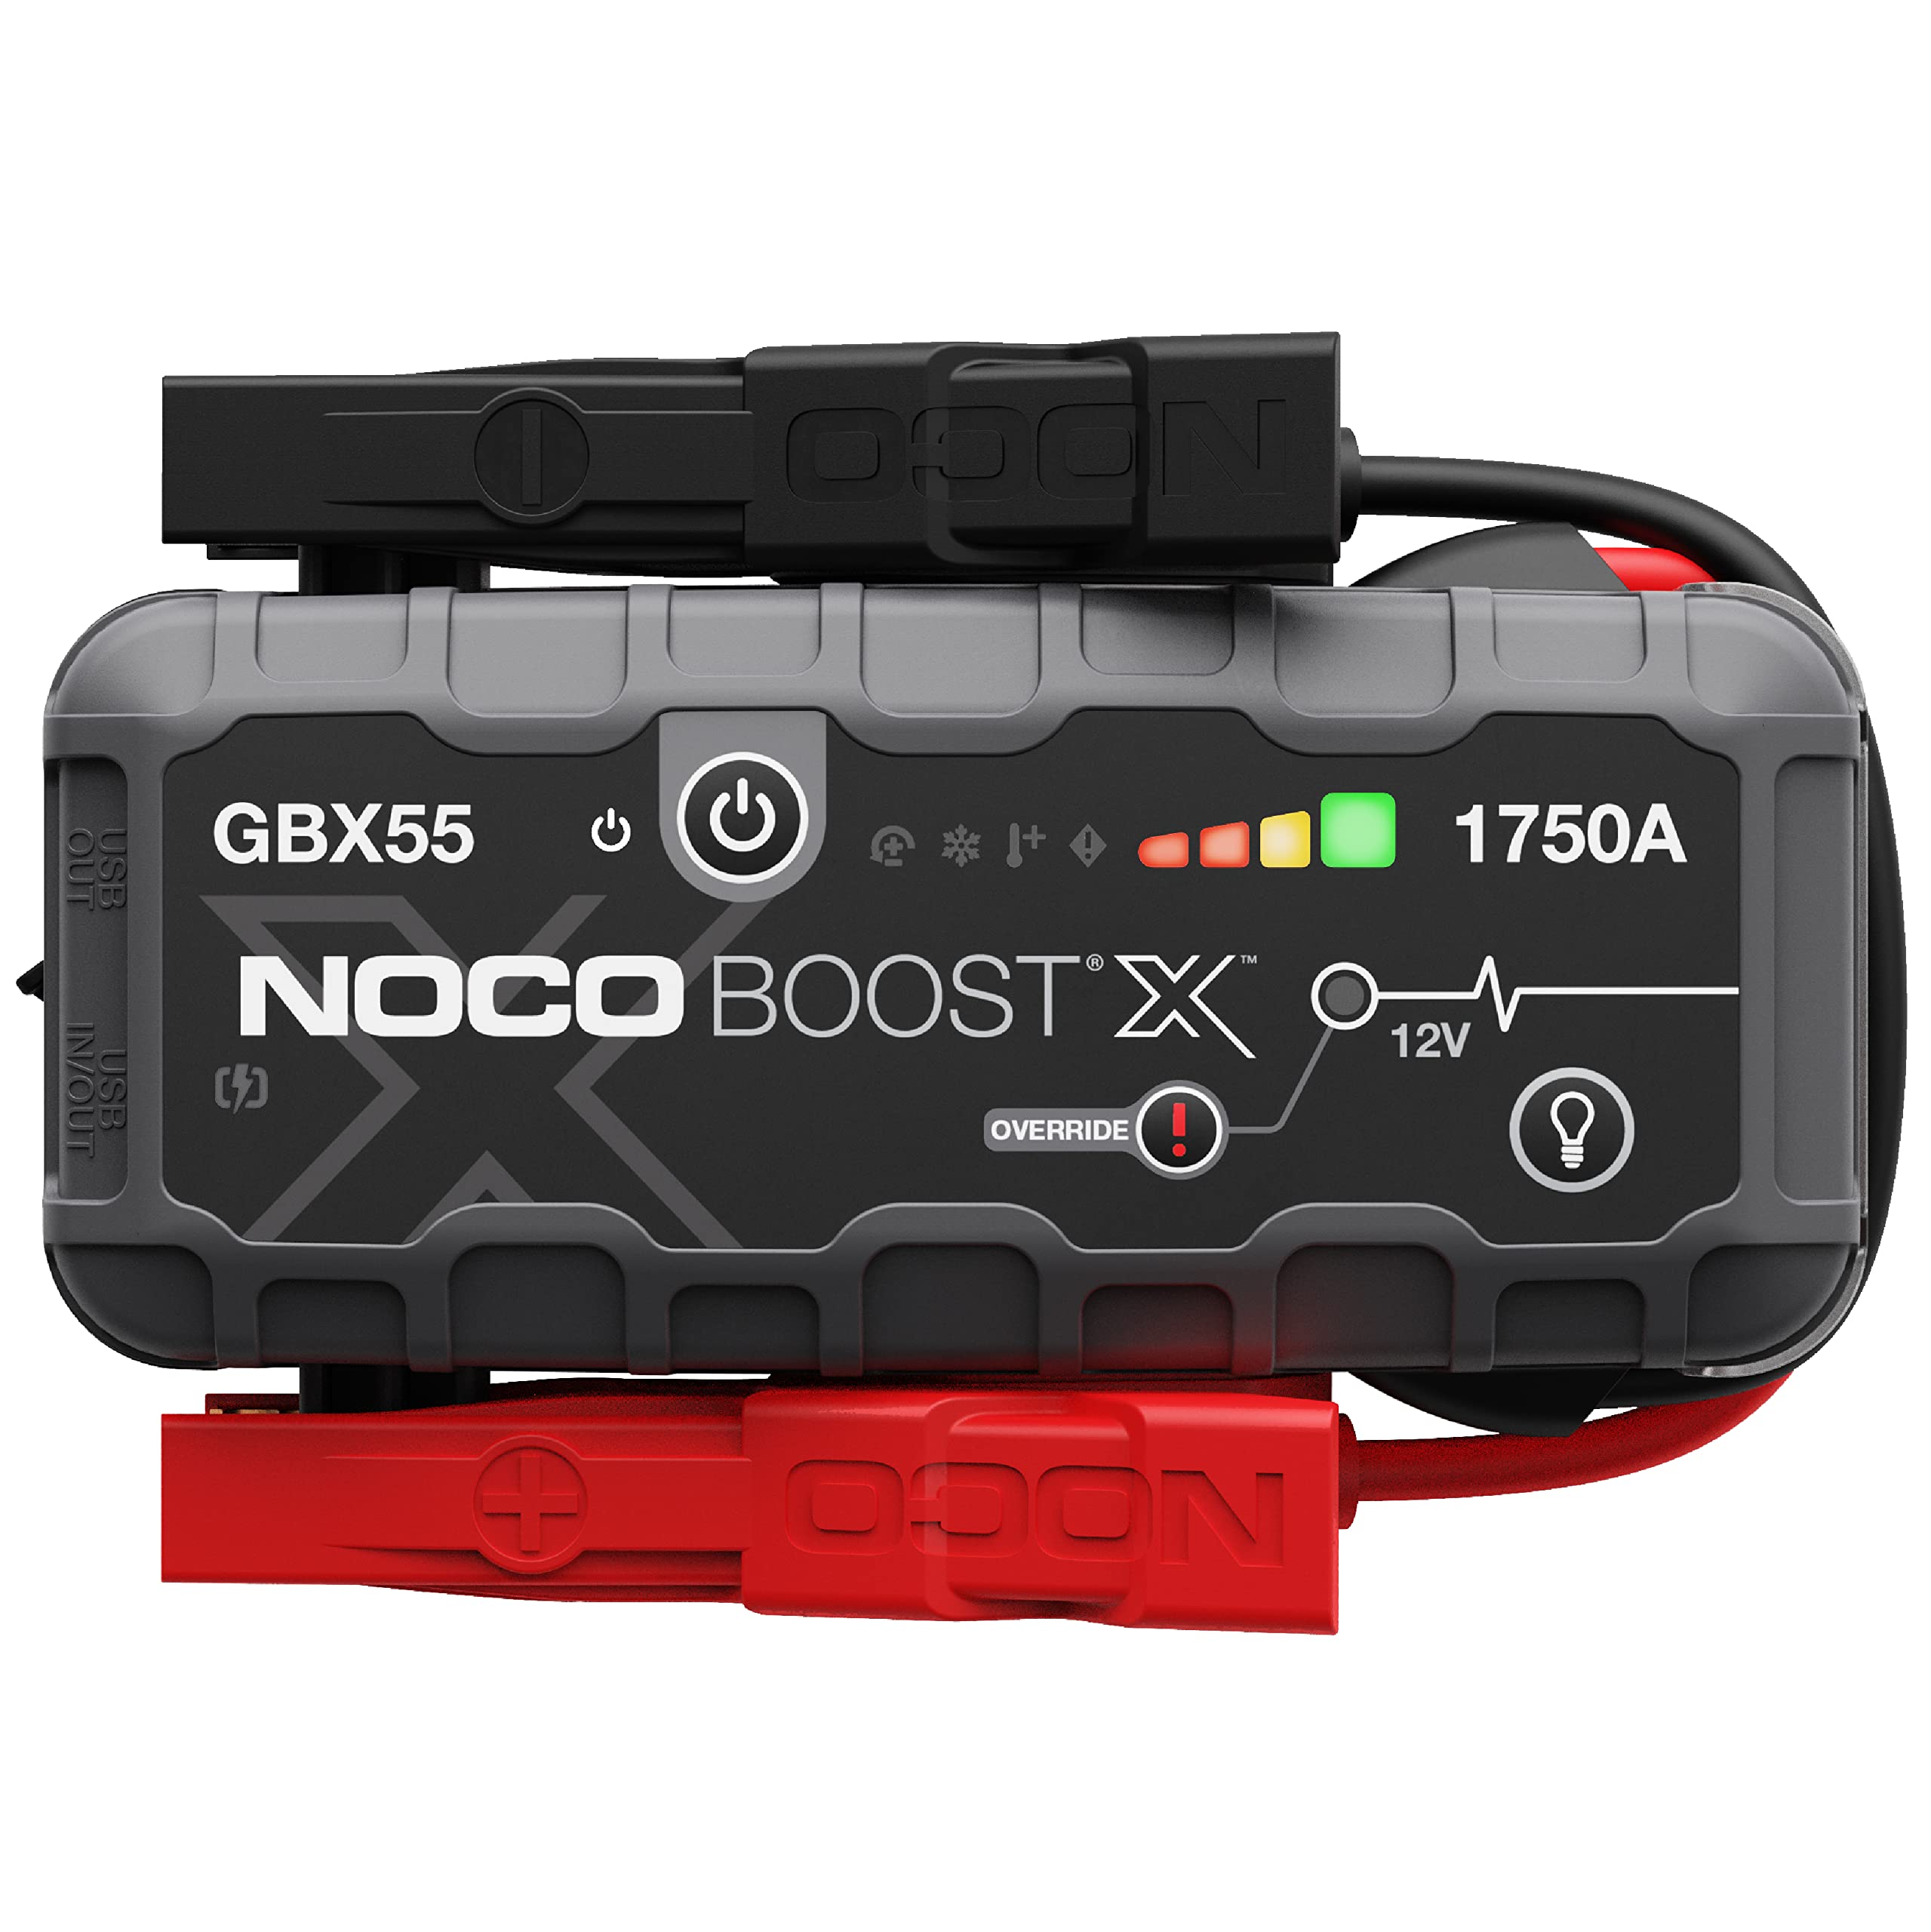 NOCO Boost X GBX55 1750A 12V UltraSafe Portable Lithium Jump Starter, Car Battery Booster Pack, USB-C Powerbank Charger, and Jumper Cables for up to 7.5-Liter Gas and 5.0-Liter Diesel Engines